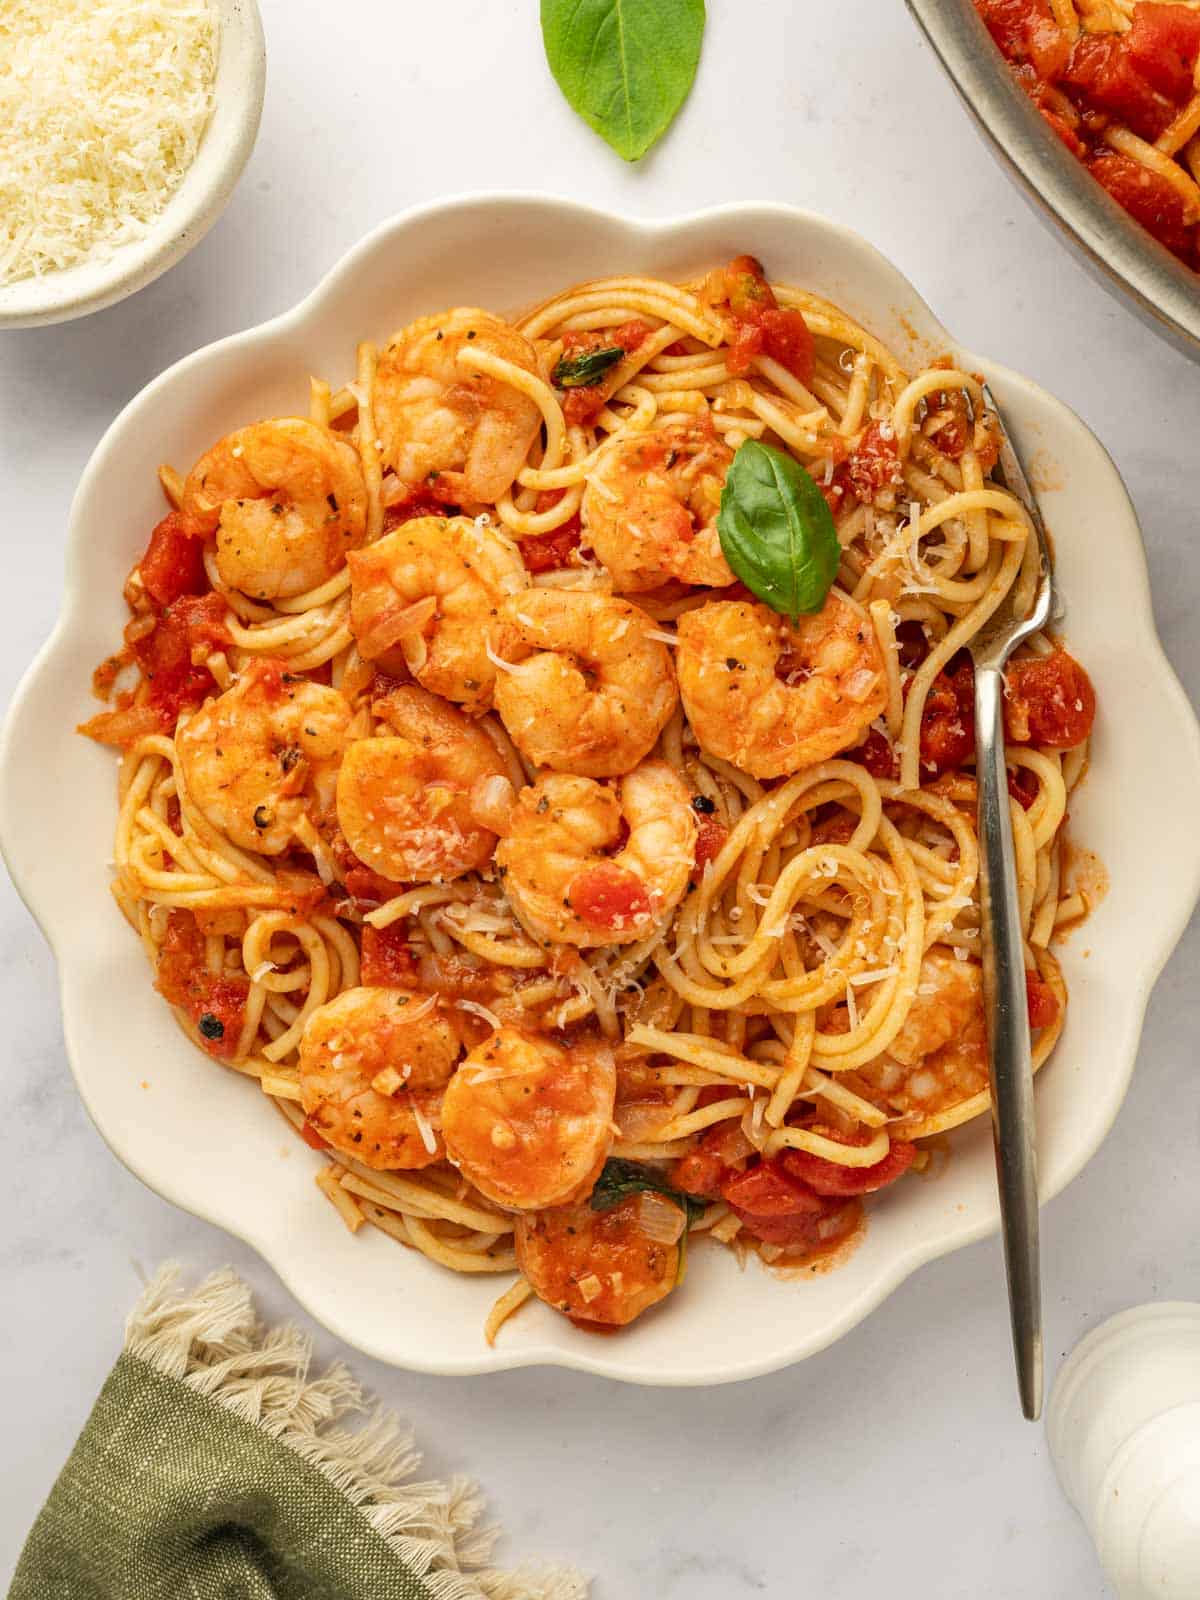 A bowl of pasta topped with sauteed shrimp.